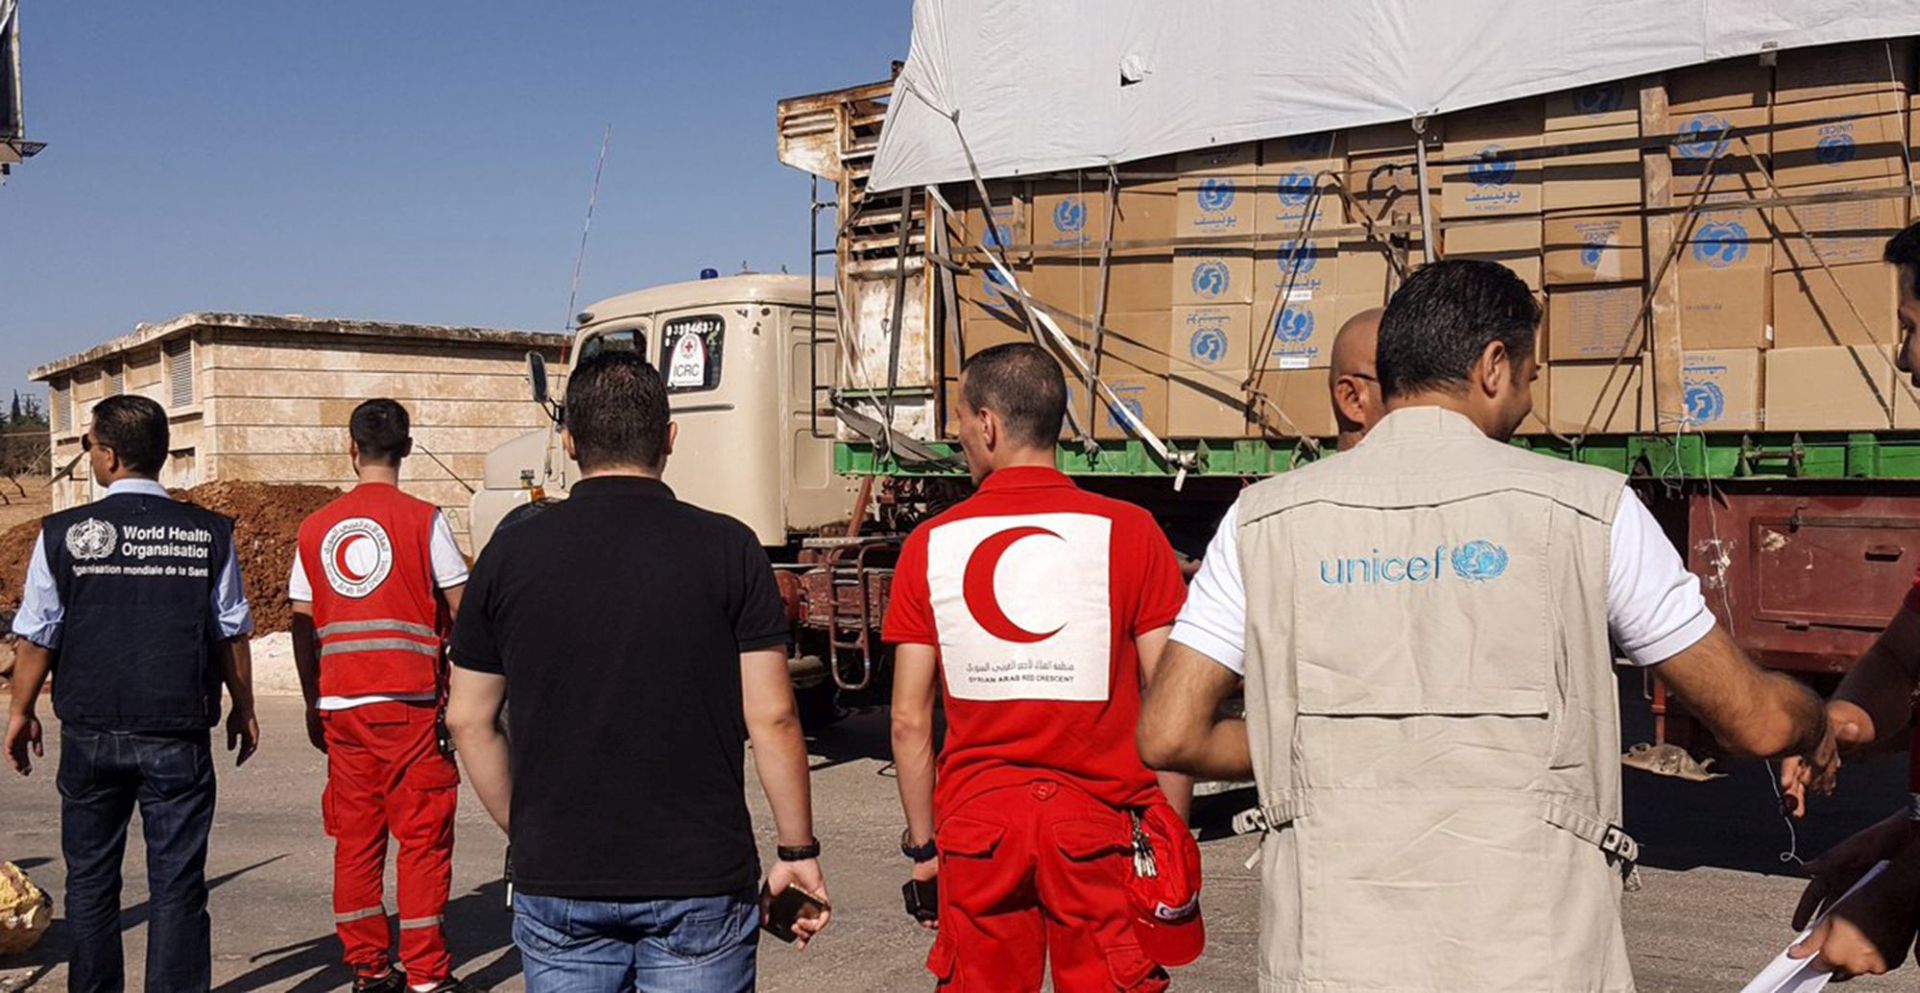 epa05548474 A handout picture made available on the website of Syrian Red Crescent  showing an aid convoy of 31 trucks preparing to set off to deliver aid to the western rural side of Aleppo, Syria, 19 September 2016. Reports state that Syrian Red Crescent trucks were bombed after a routine delivery of supplies to the beleaguered city of Aleppo in which more than 10 people were killed in the attack, a Red Cross Official has said.  EPA/SYRIAN RED CRESENT / HANDOUT  HANDOUT EDITORIAL USE ONLY/NO SALES